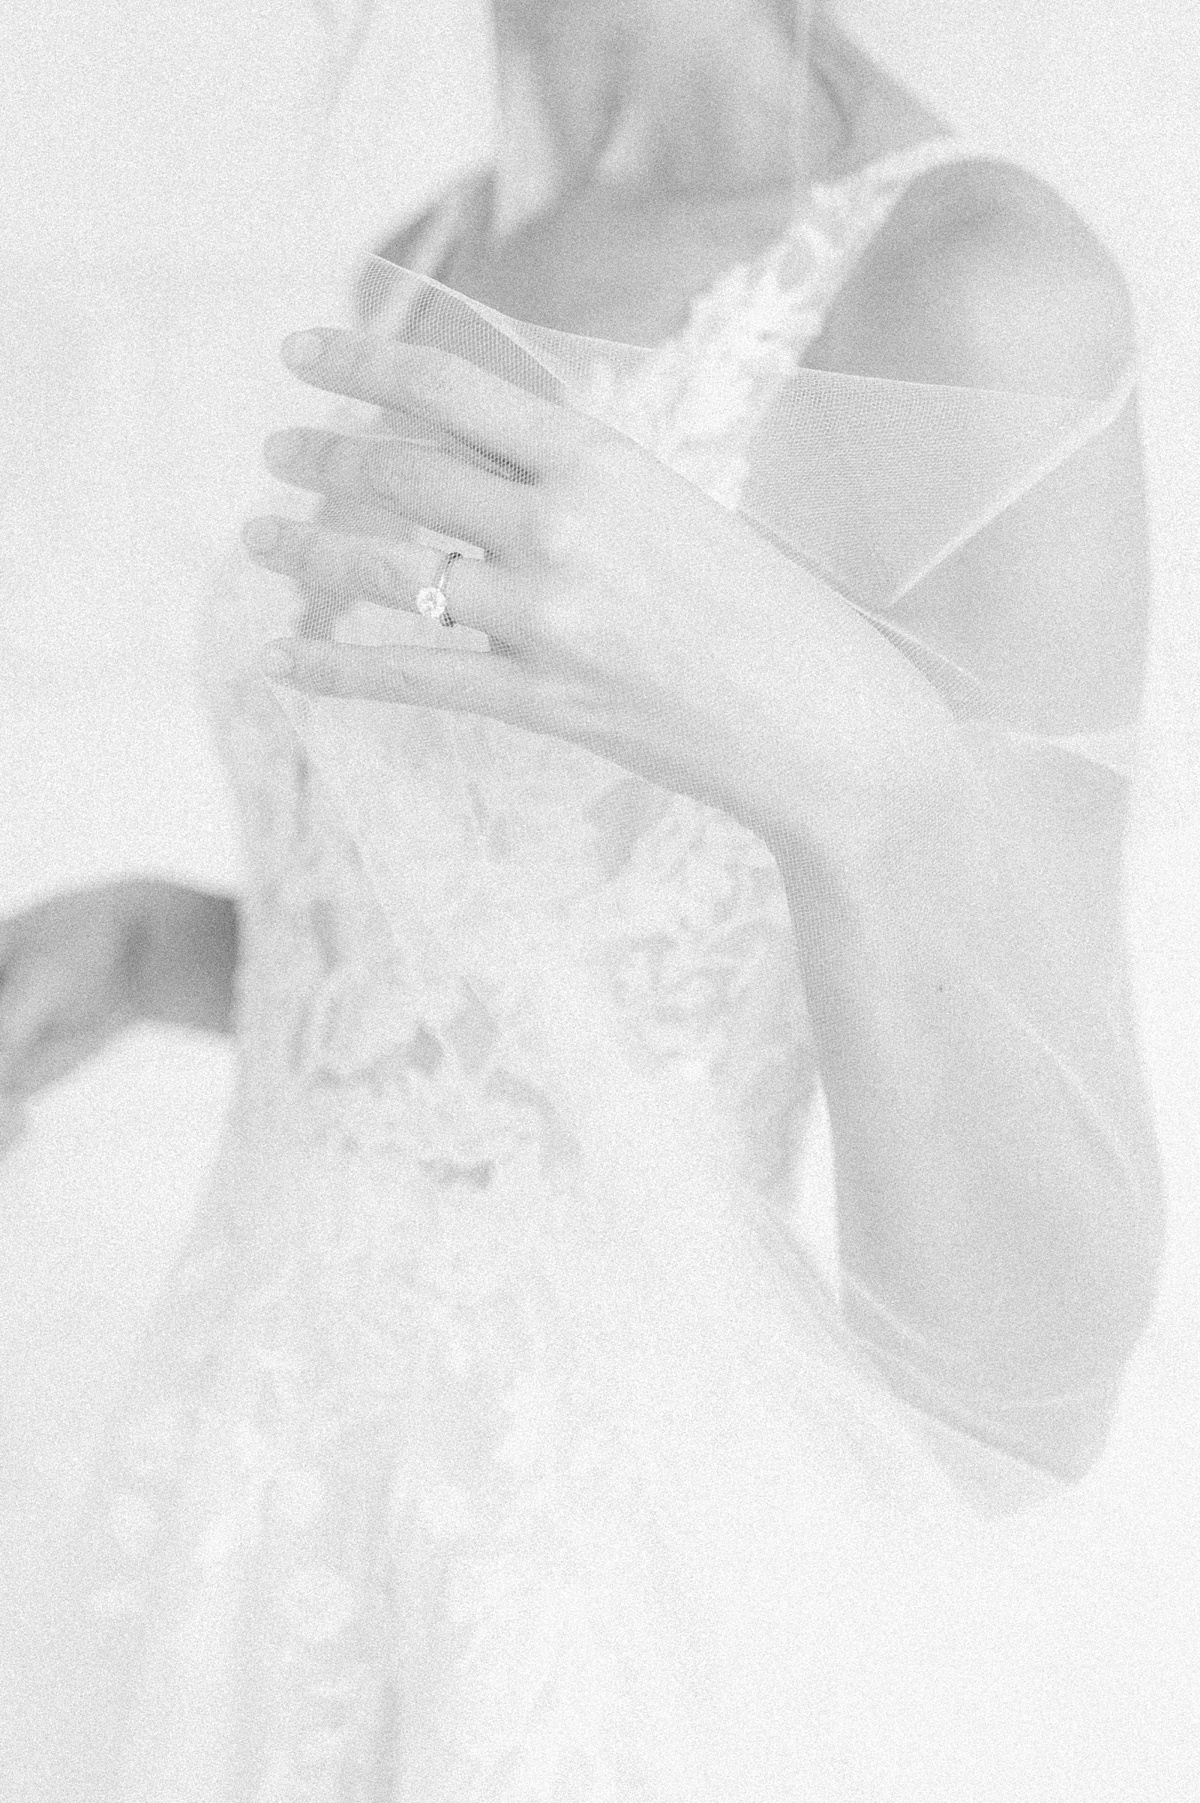 engagement ring and wedding veil bridal photography 